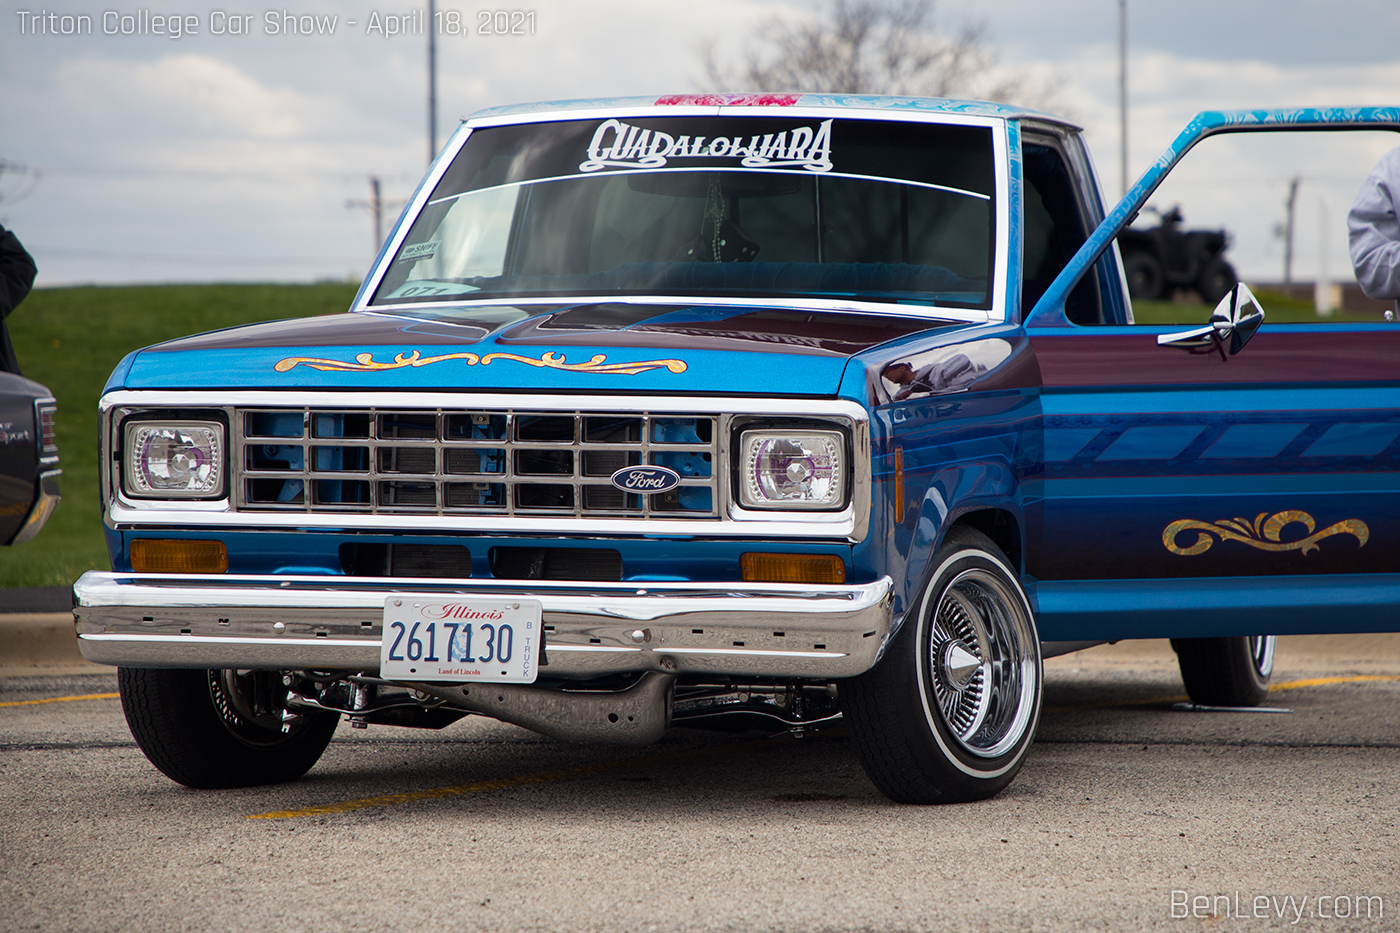 Lowrider Ford Pickup